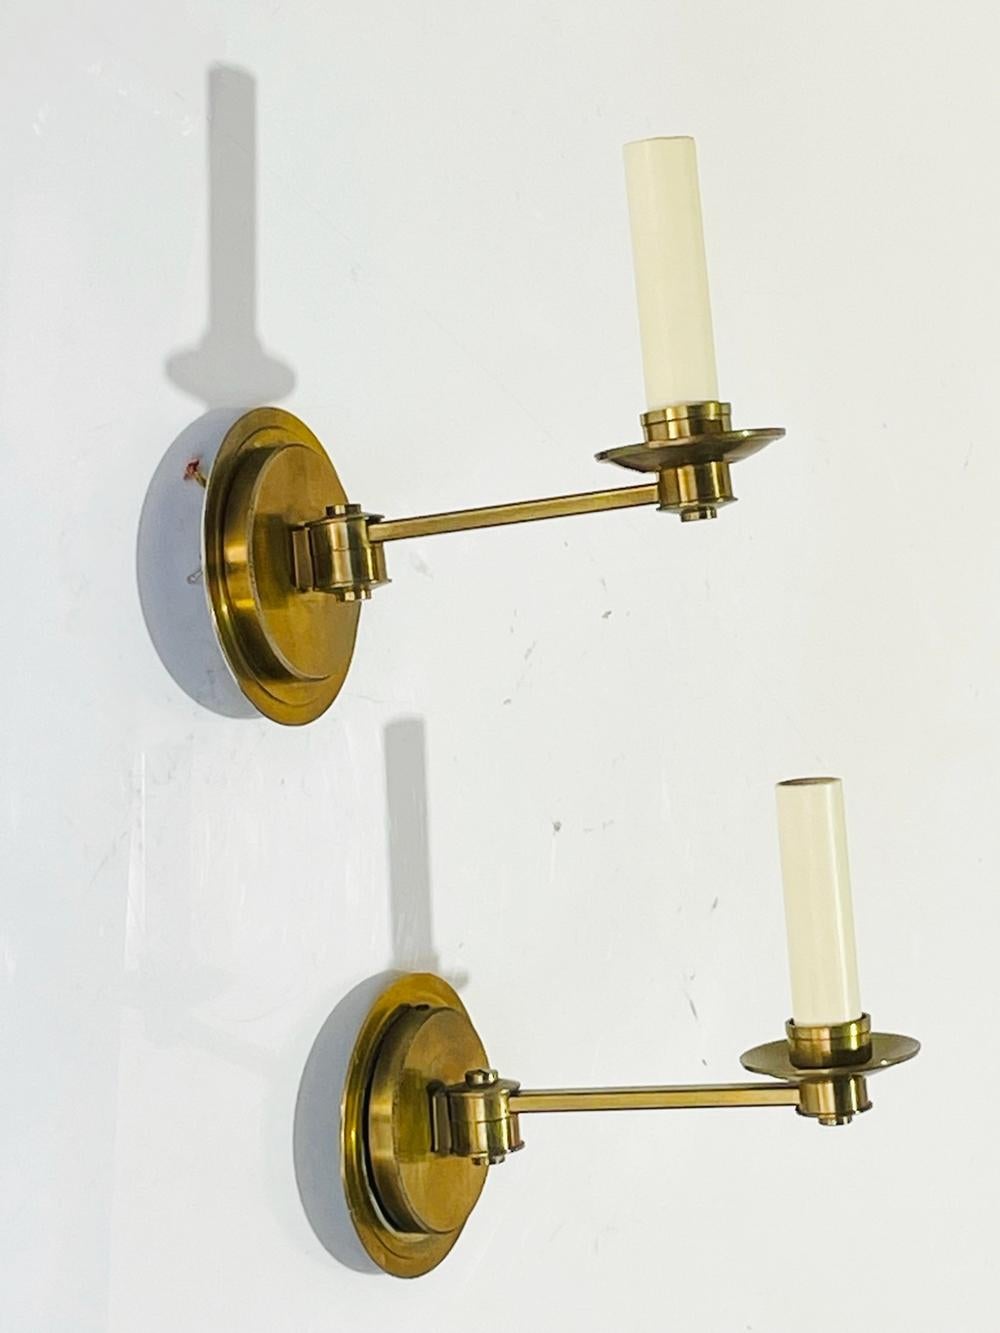 Contemporary Pair of Cromer Swing Arm Brass Sconces by Vaughan Designs